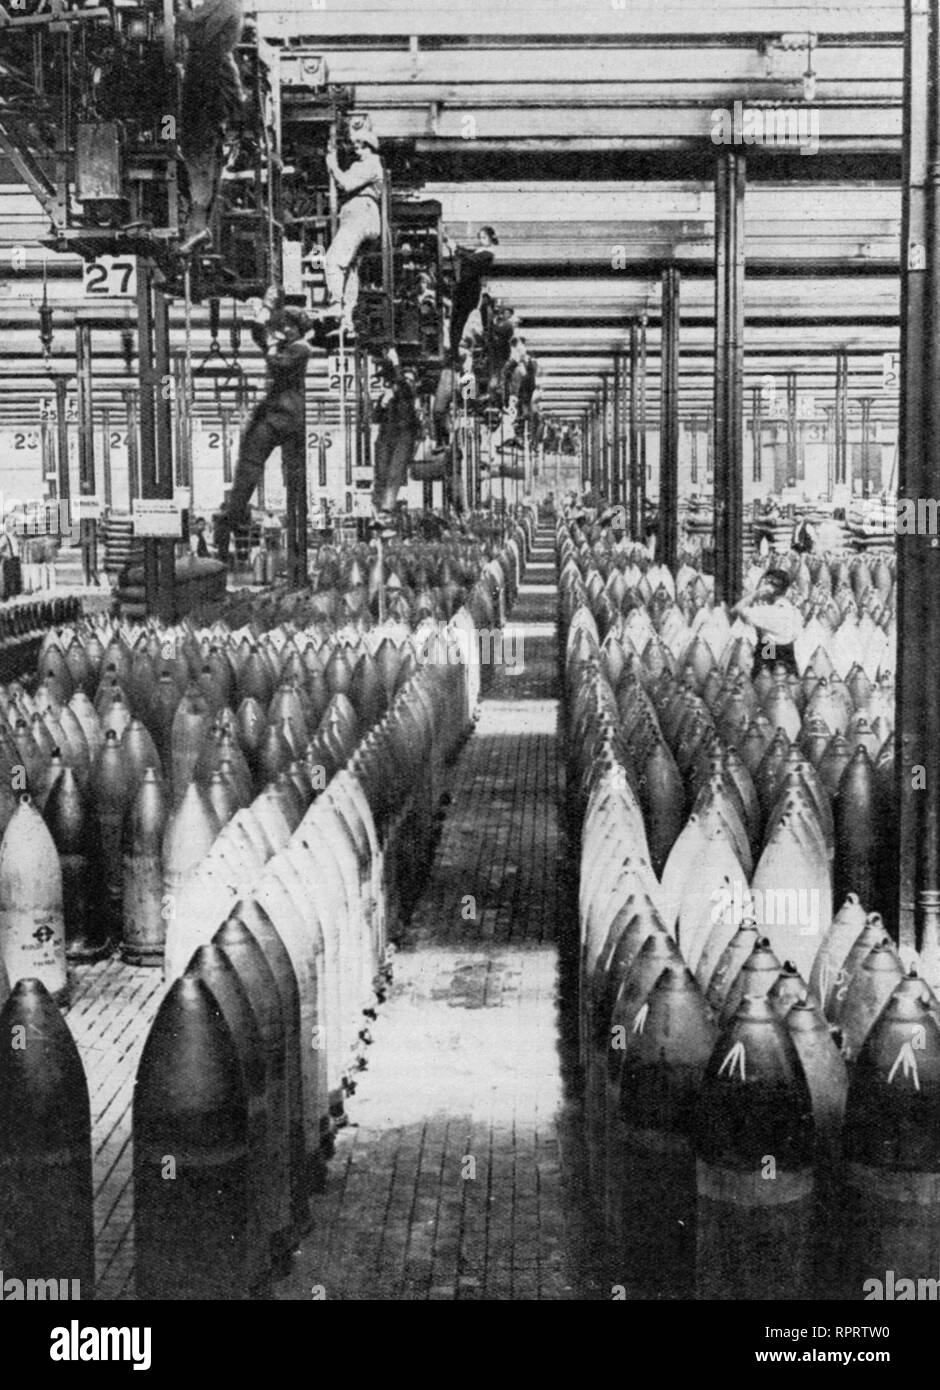 Women at work during the First World War, July 1917. Munitions Production, Chilwell, Nottinghamshire, England, July 1917. 'Crane girls' at work at the National Filling Factory, Chilwell. Munitionettes were British women employed in munitions factories during the time of the First World War. Stock Photo